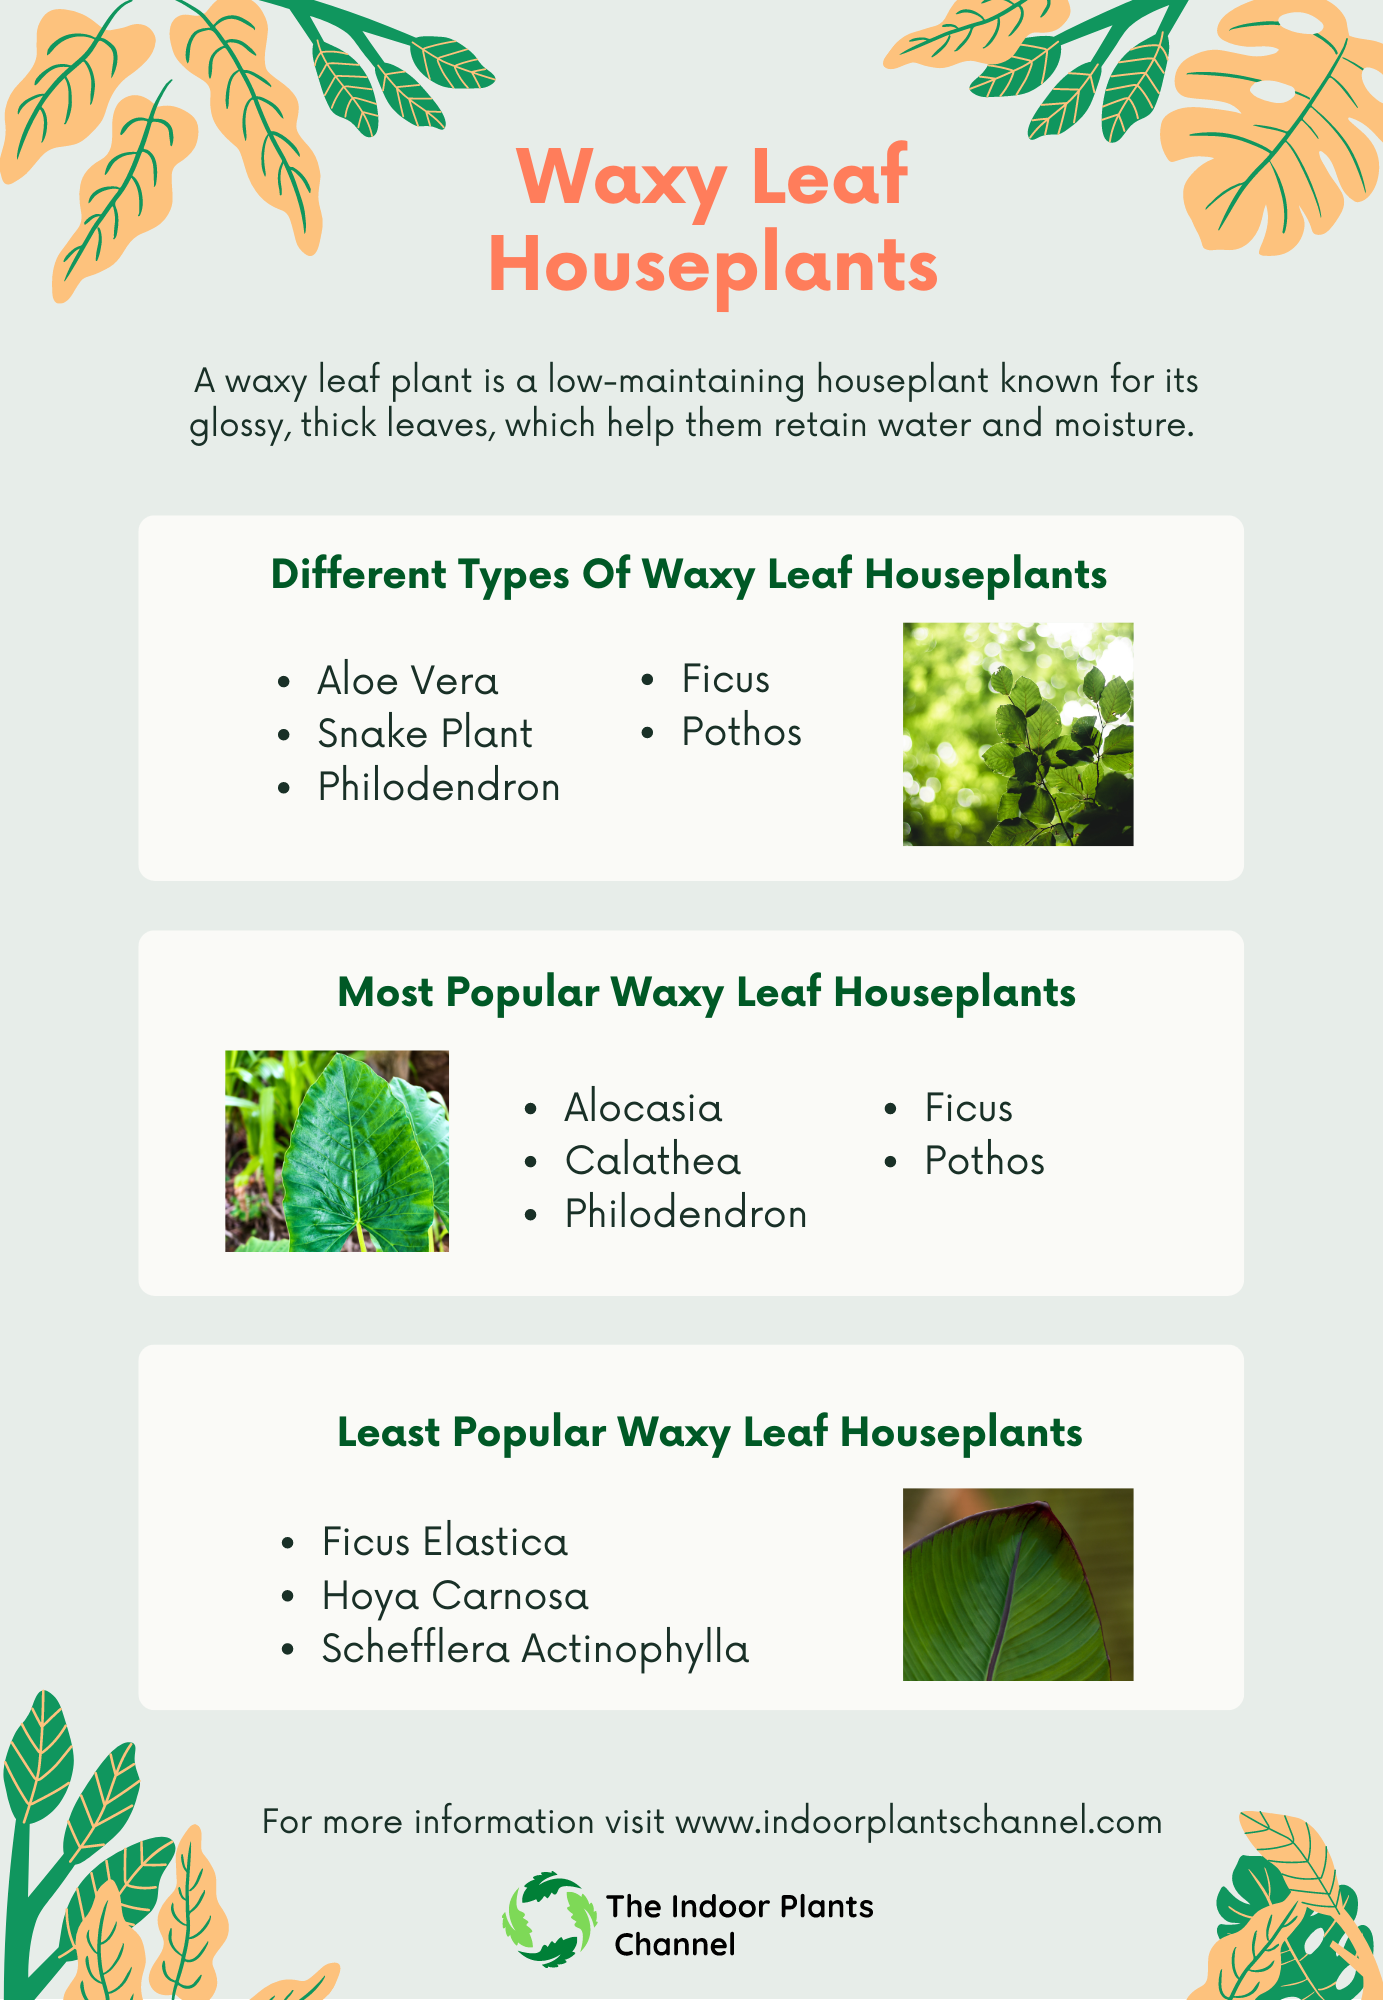 Pros And Cons Of Waxy Leaf Houseplants